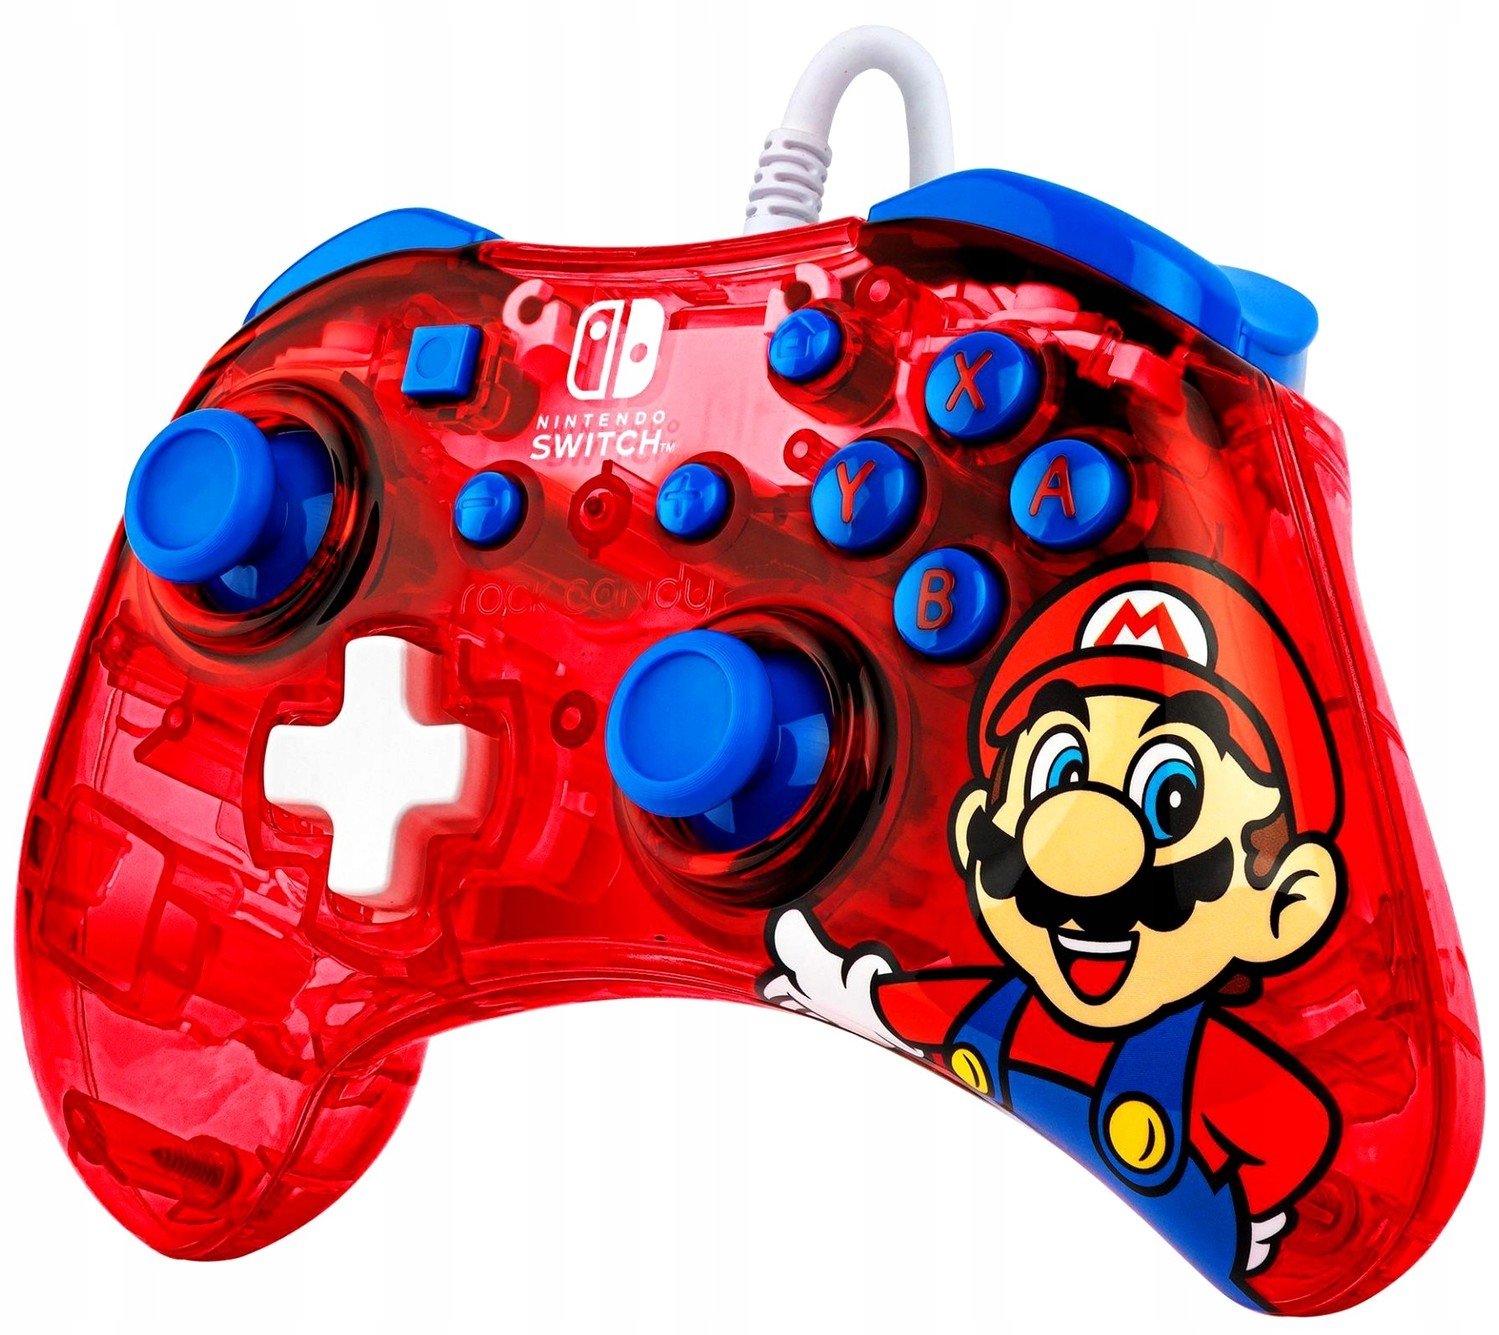 Pdp Switch Rock Candy Mini Pad Mario